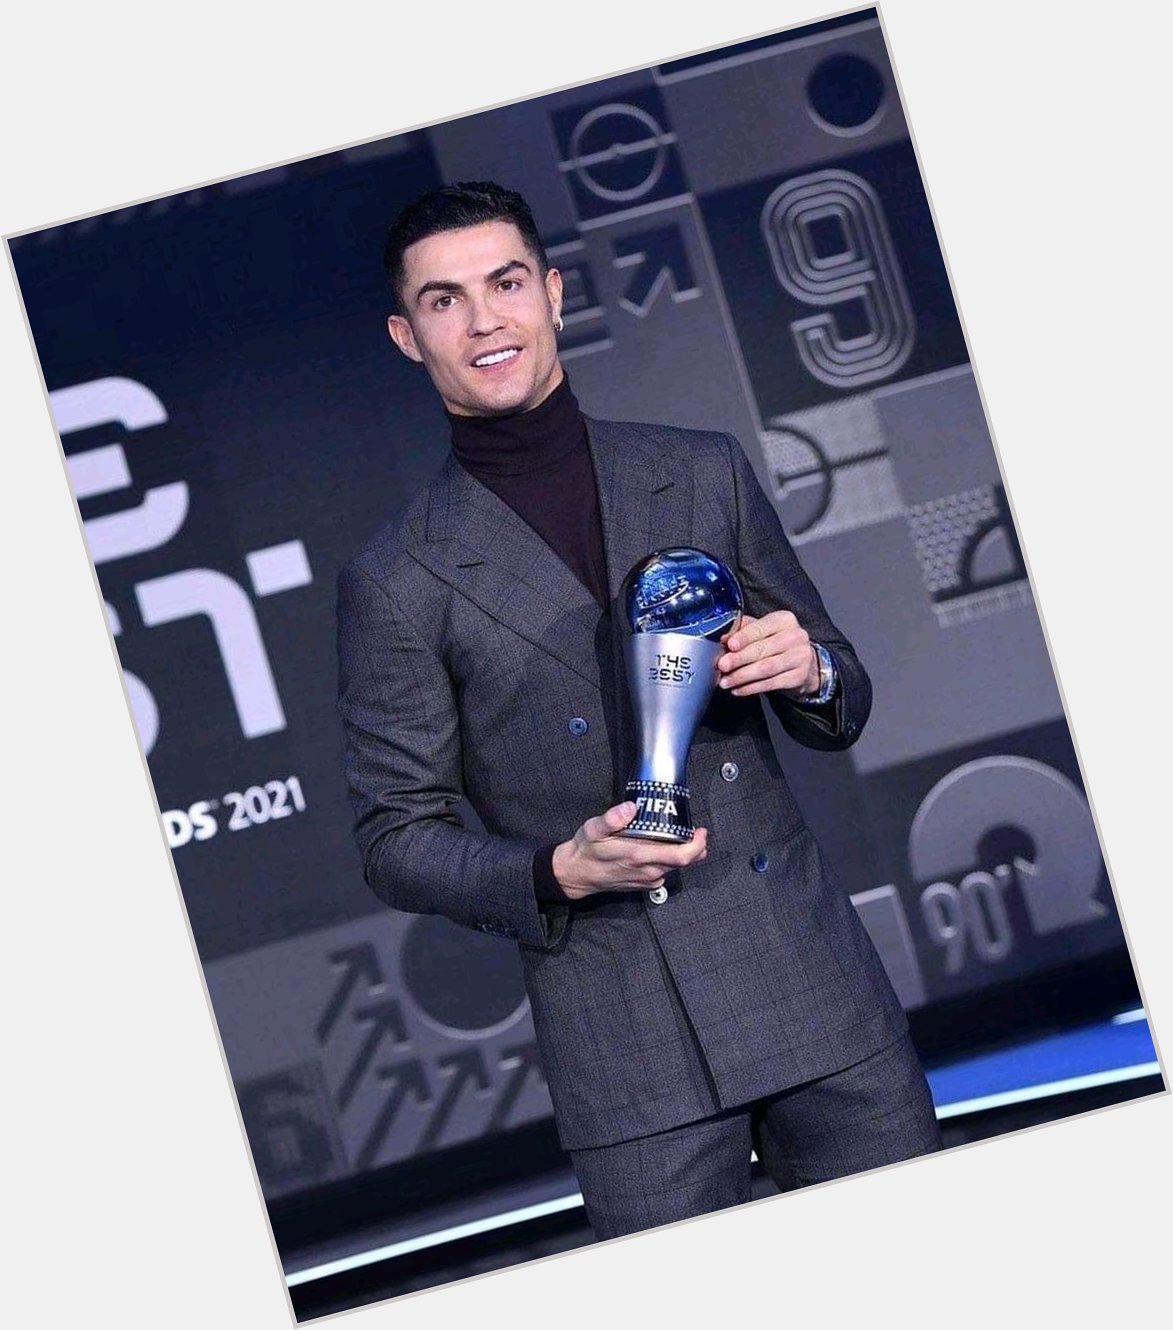 A Very Happy Birthday to My Favourite Footballer Cristiano Ronaldo (CR7). Love you so much       